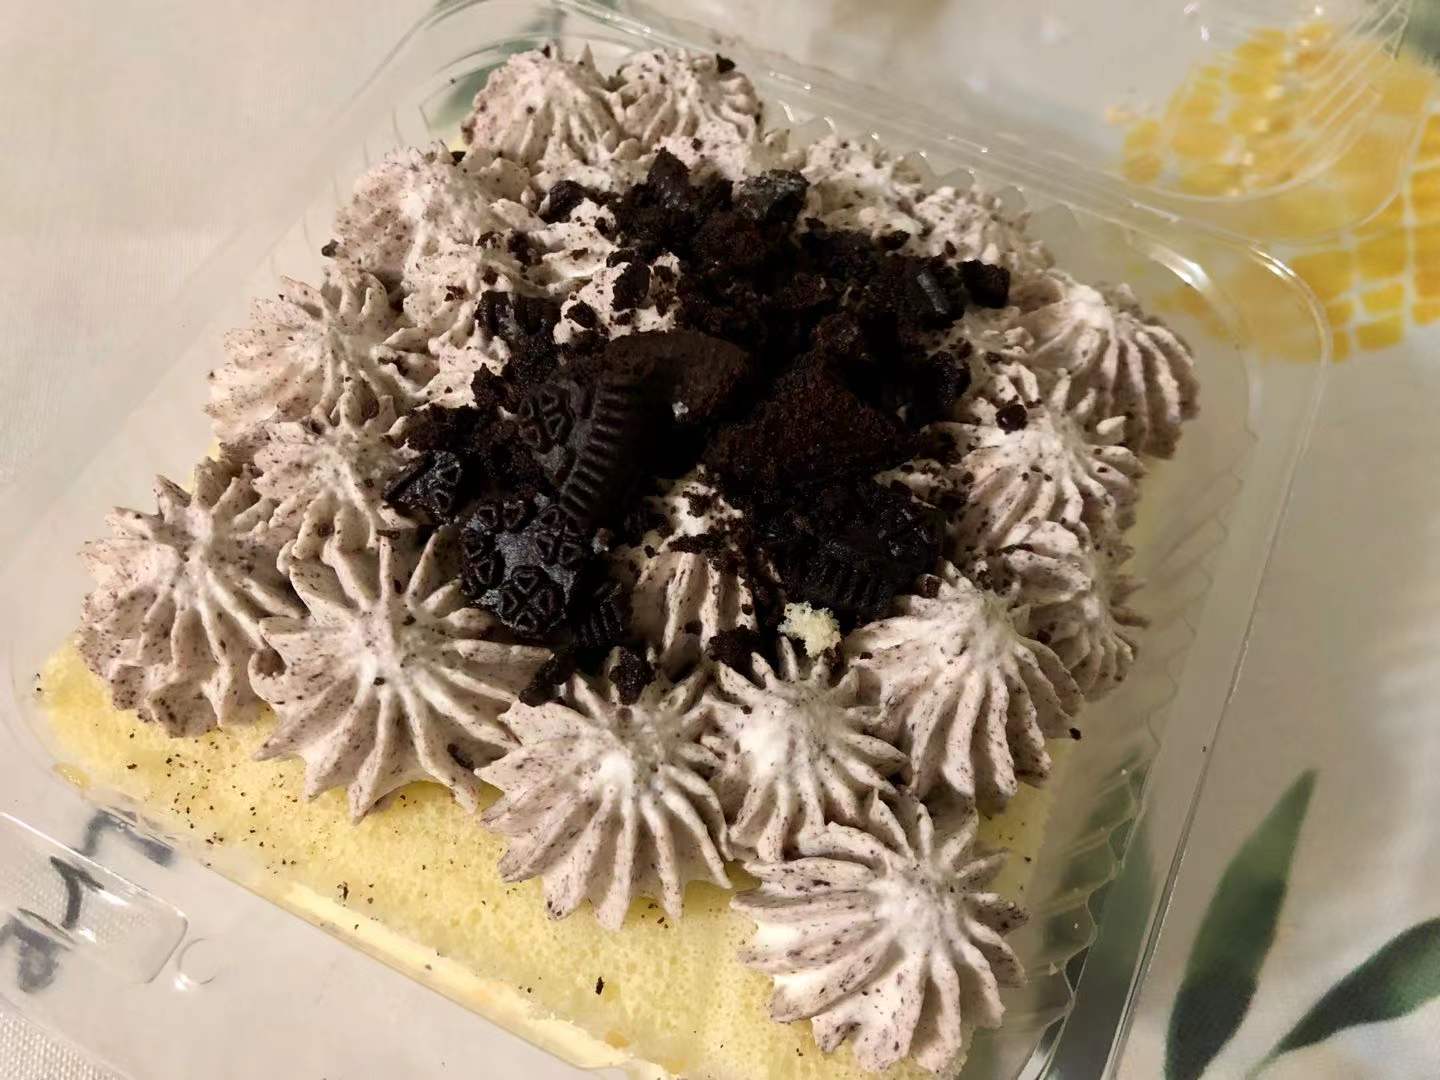 In a plastic takeout container, there is an Oreo cake with lots of poufed gray cream artfully displayed. Photo by Xiaohui Zhang.